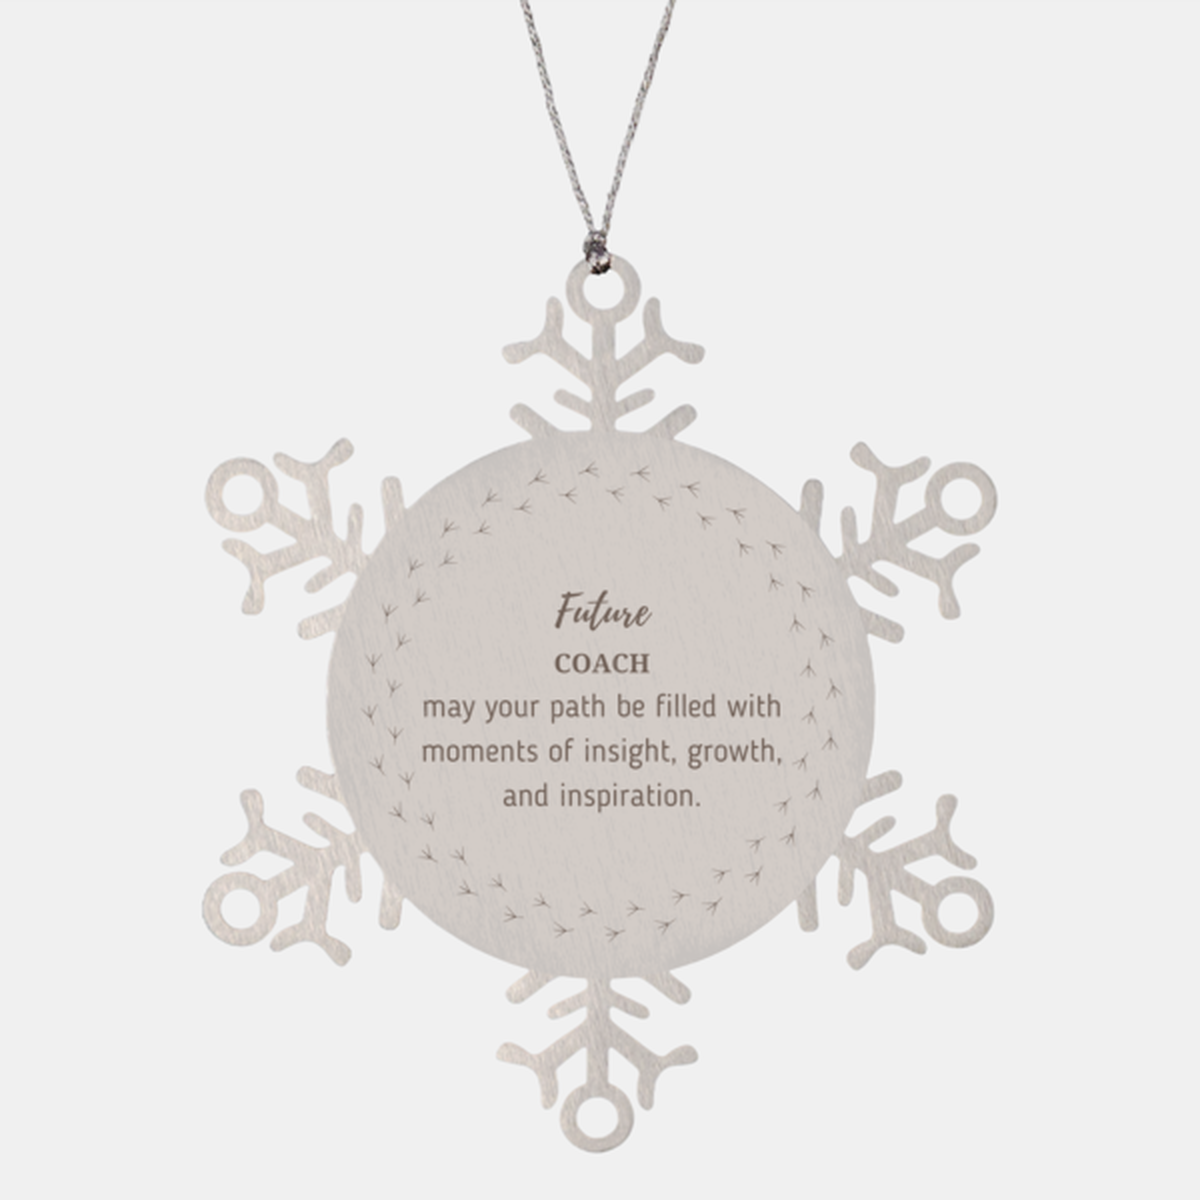 Future Coach Gifts, May your path be filled with moments of insight, Graduation Gifts for New Coach, Christmas Unique Snowflake Ornament For Men, Women, Friends